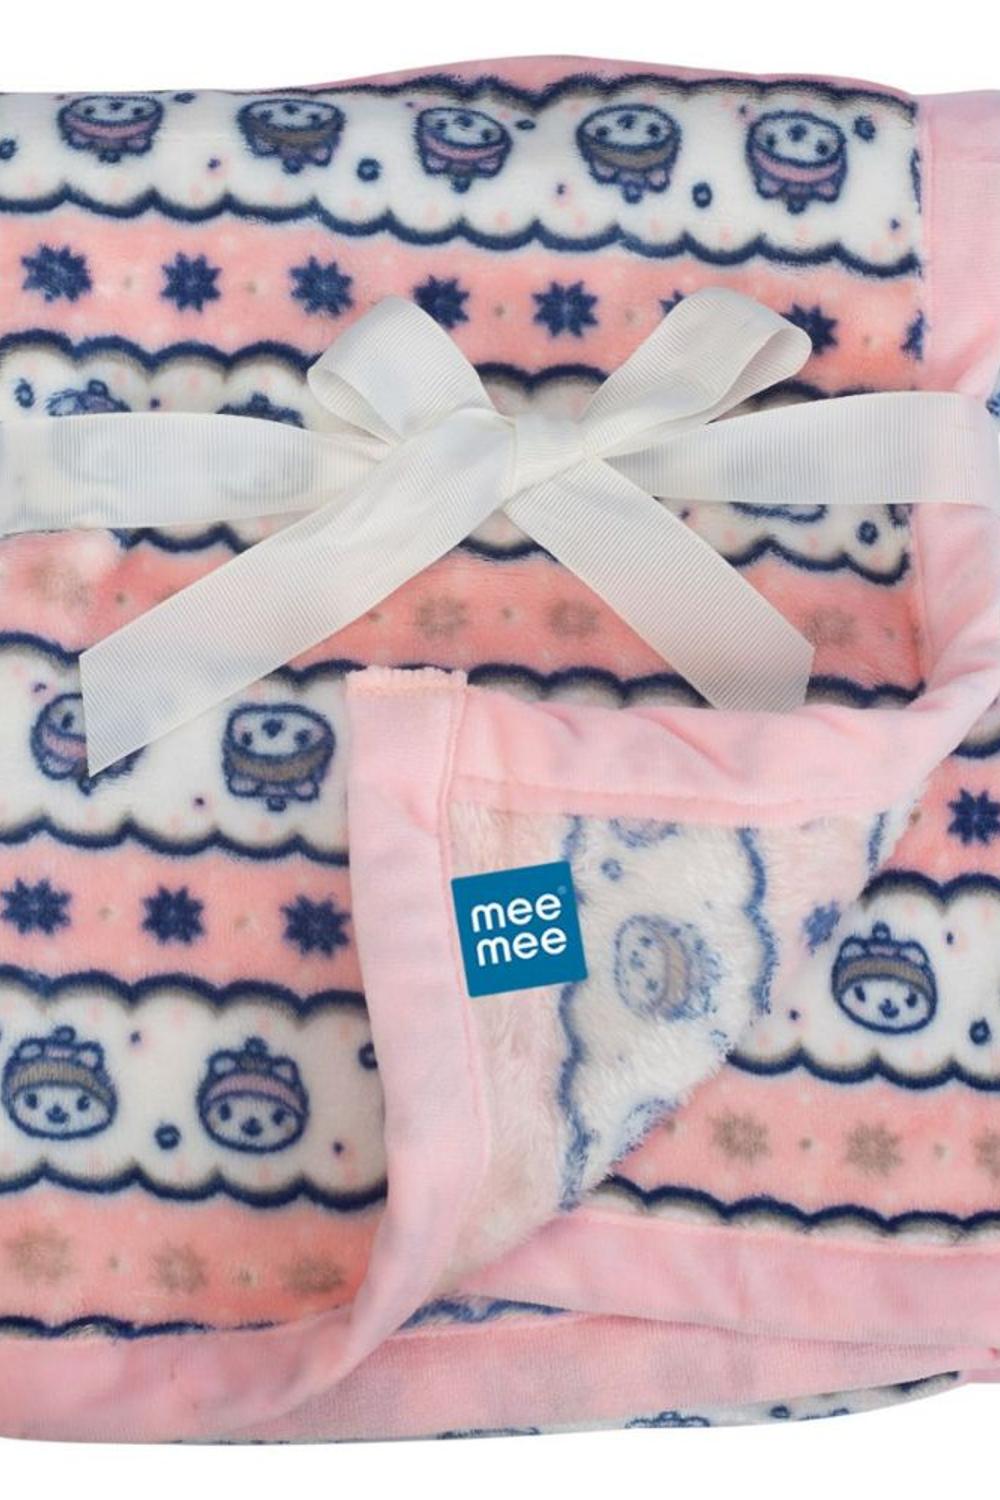 Mee Mee Soft, Lightweight & Comfortable Baby Blankets (Double Layered, Light Pink)